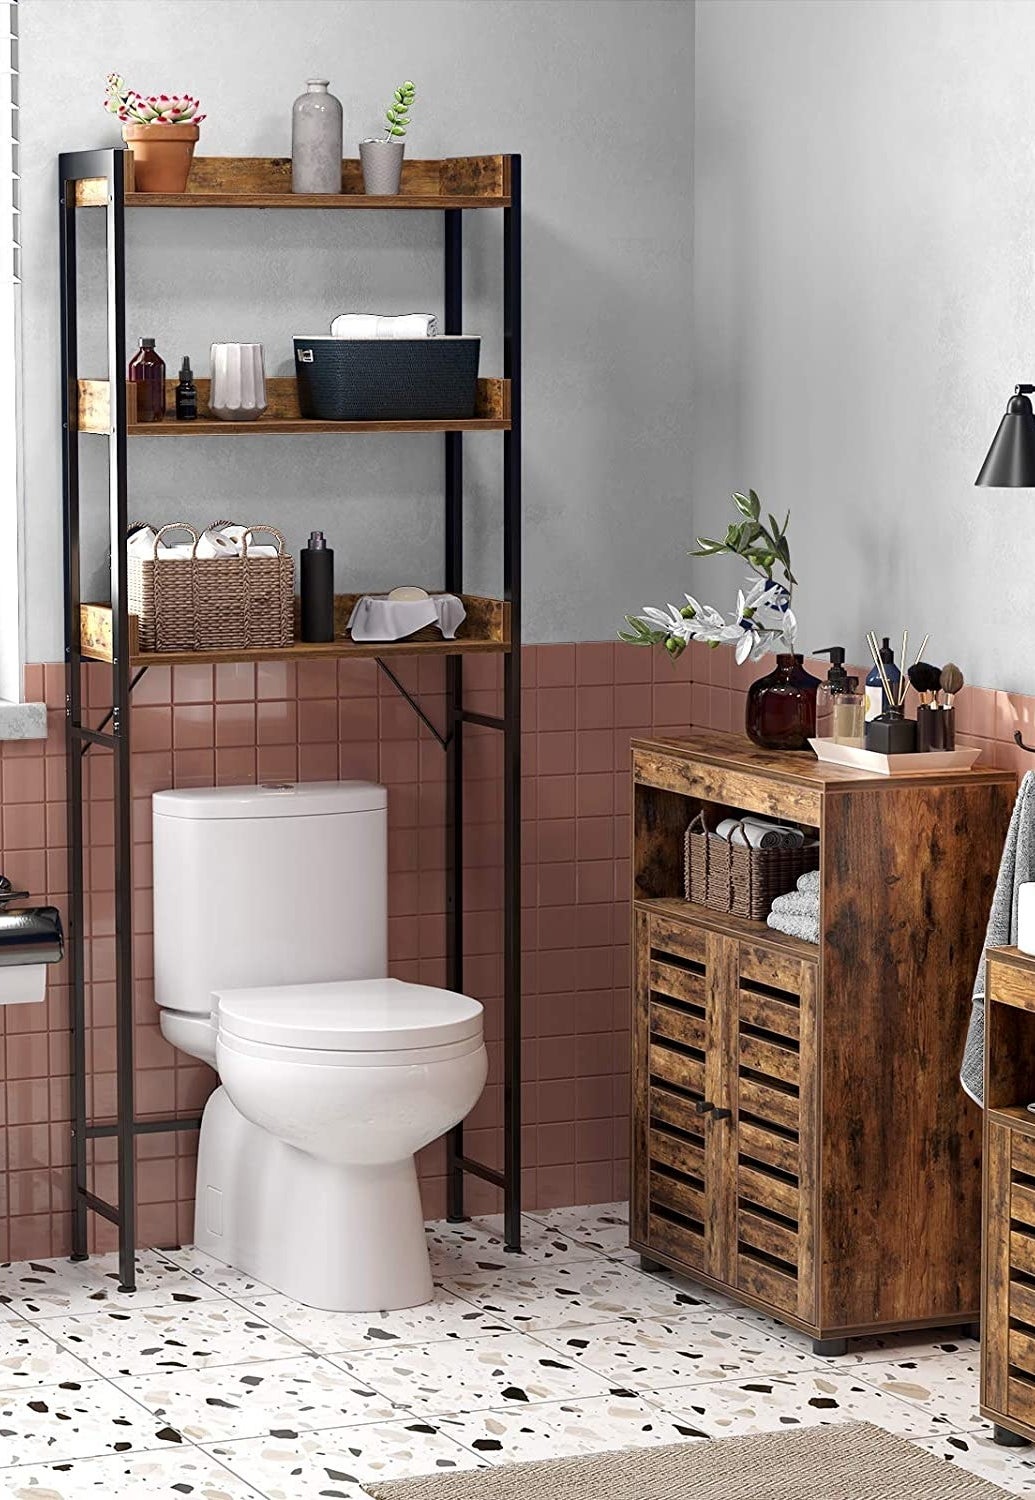 the storage shelf over a toilet in a trendy bathroom